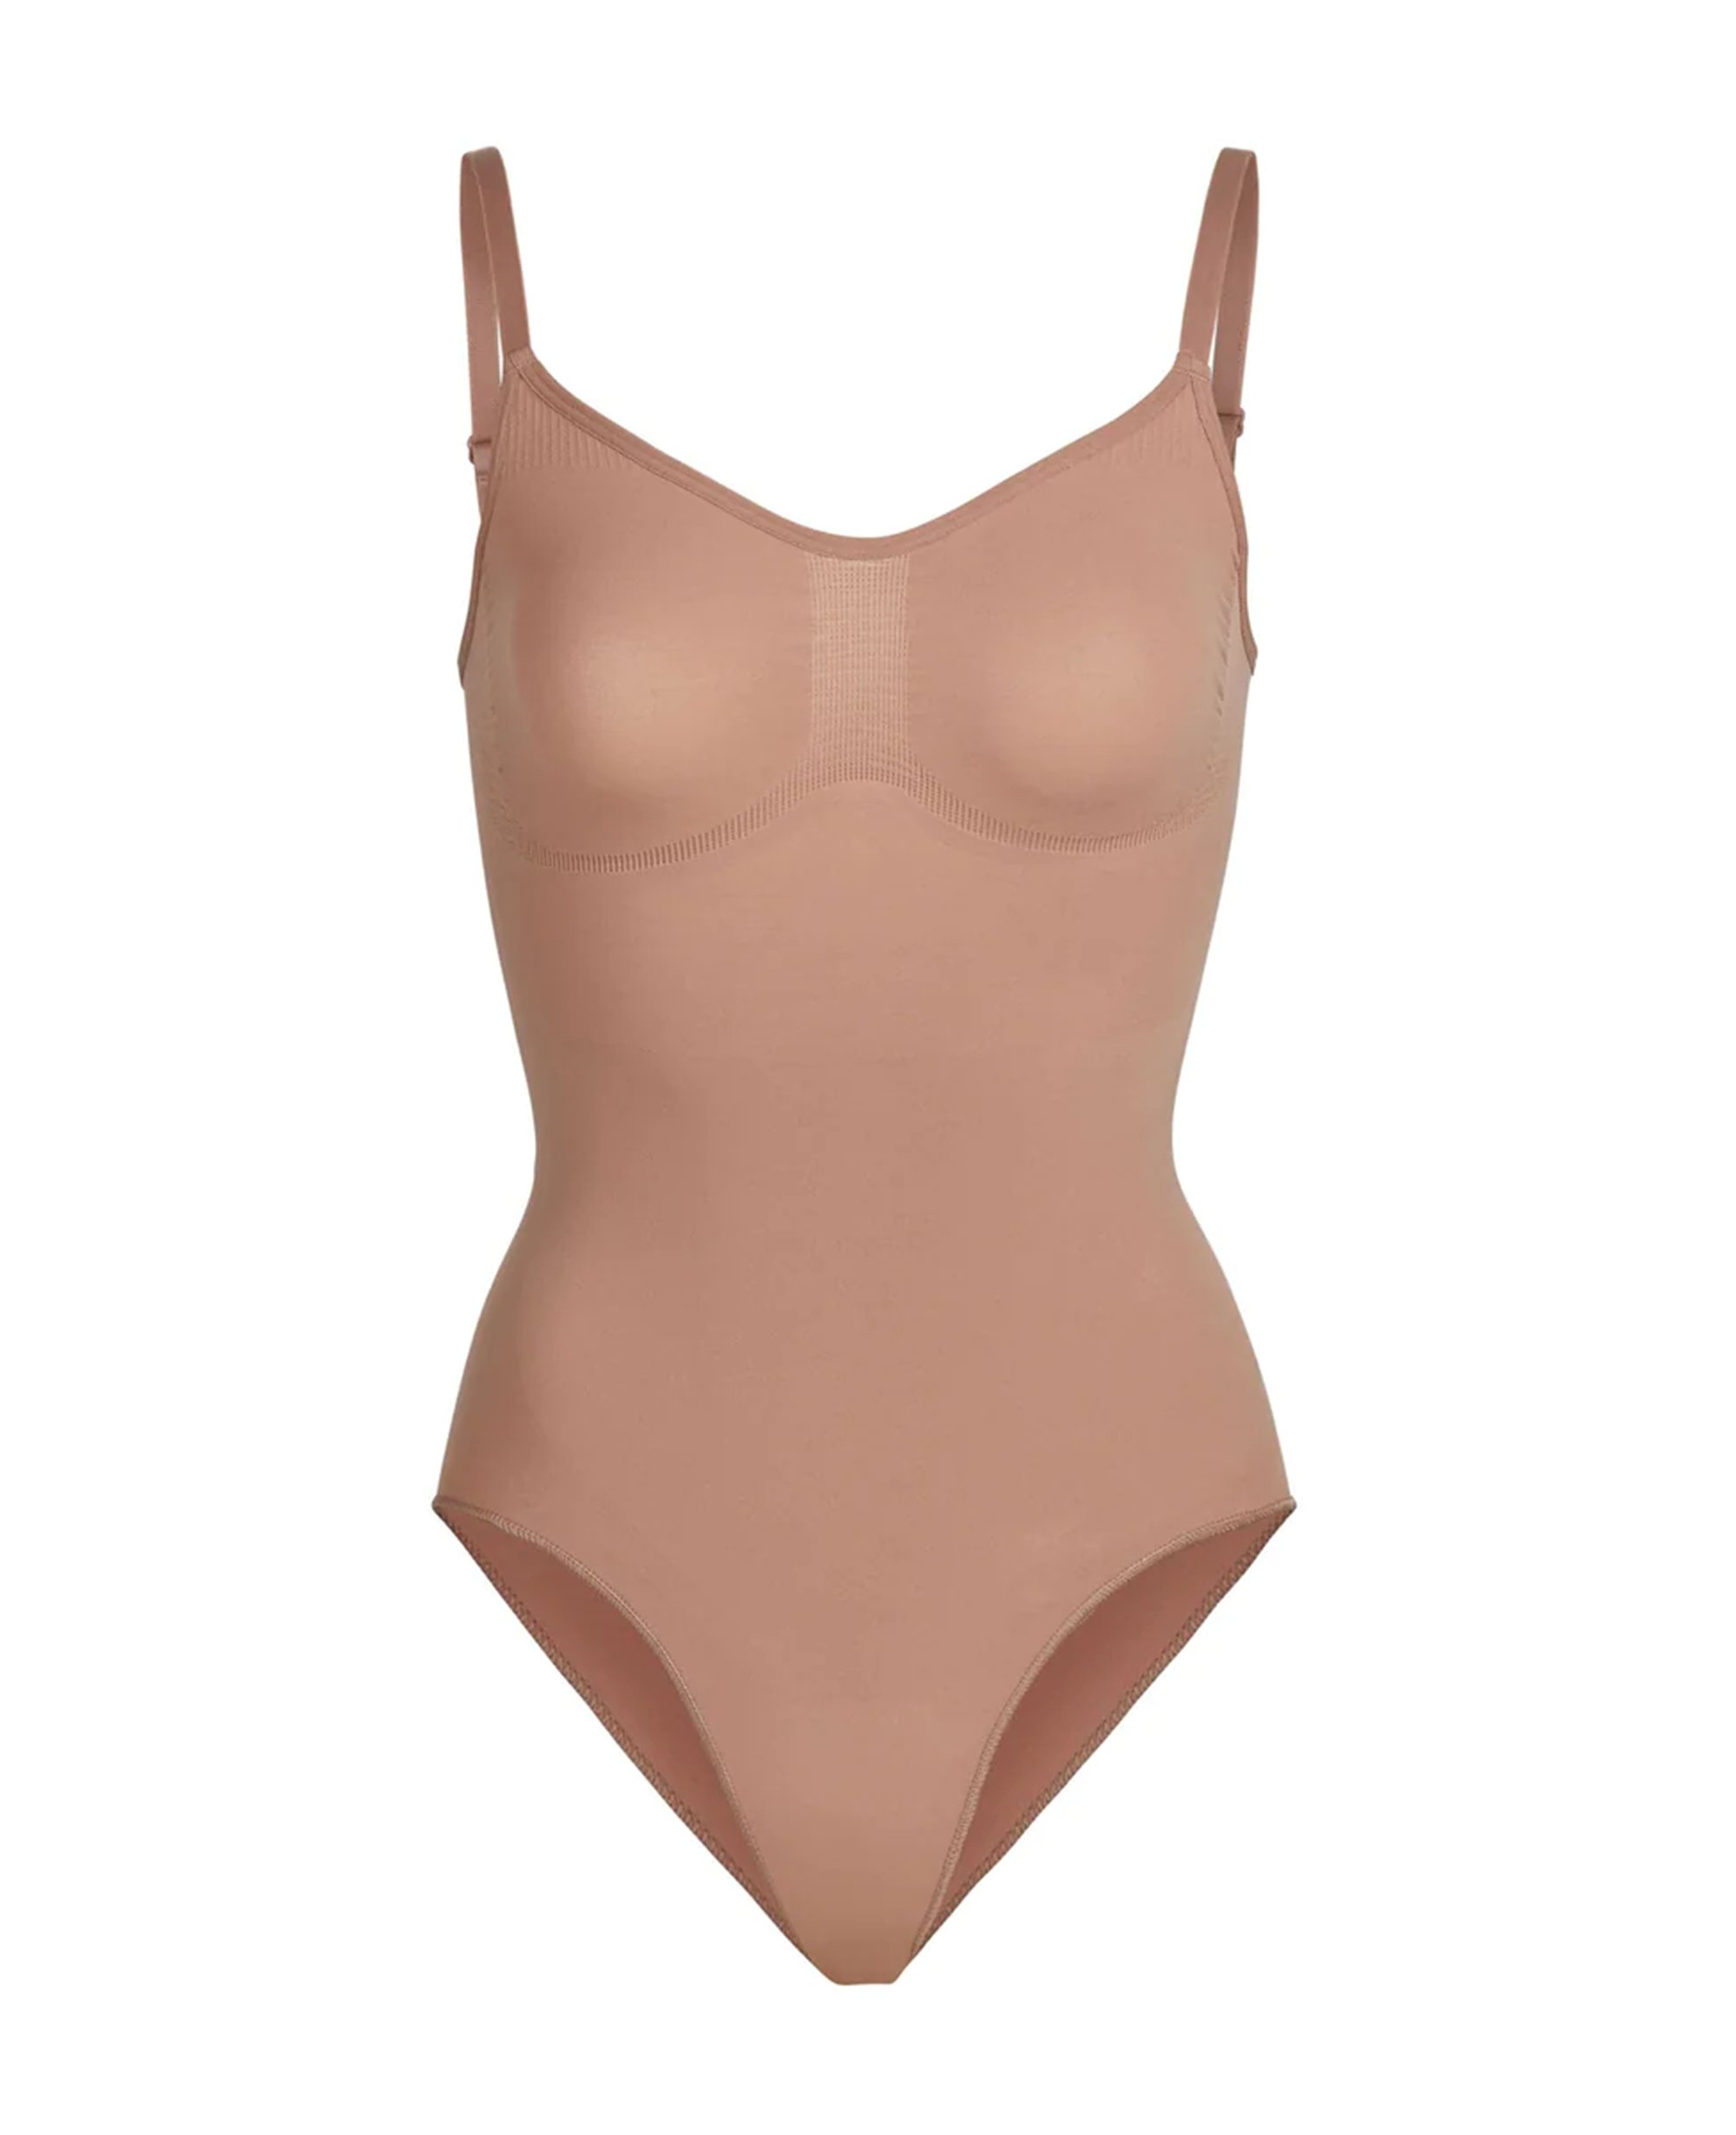 I tested the viral Skims bodysuit dupe to see if it was any good